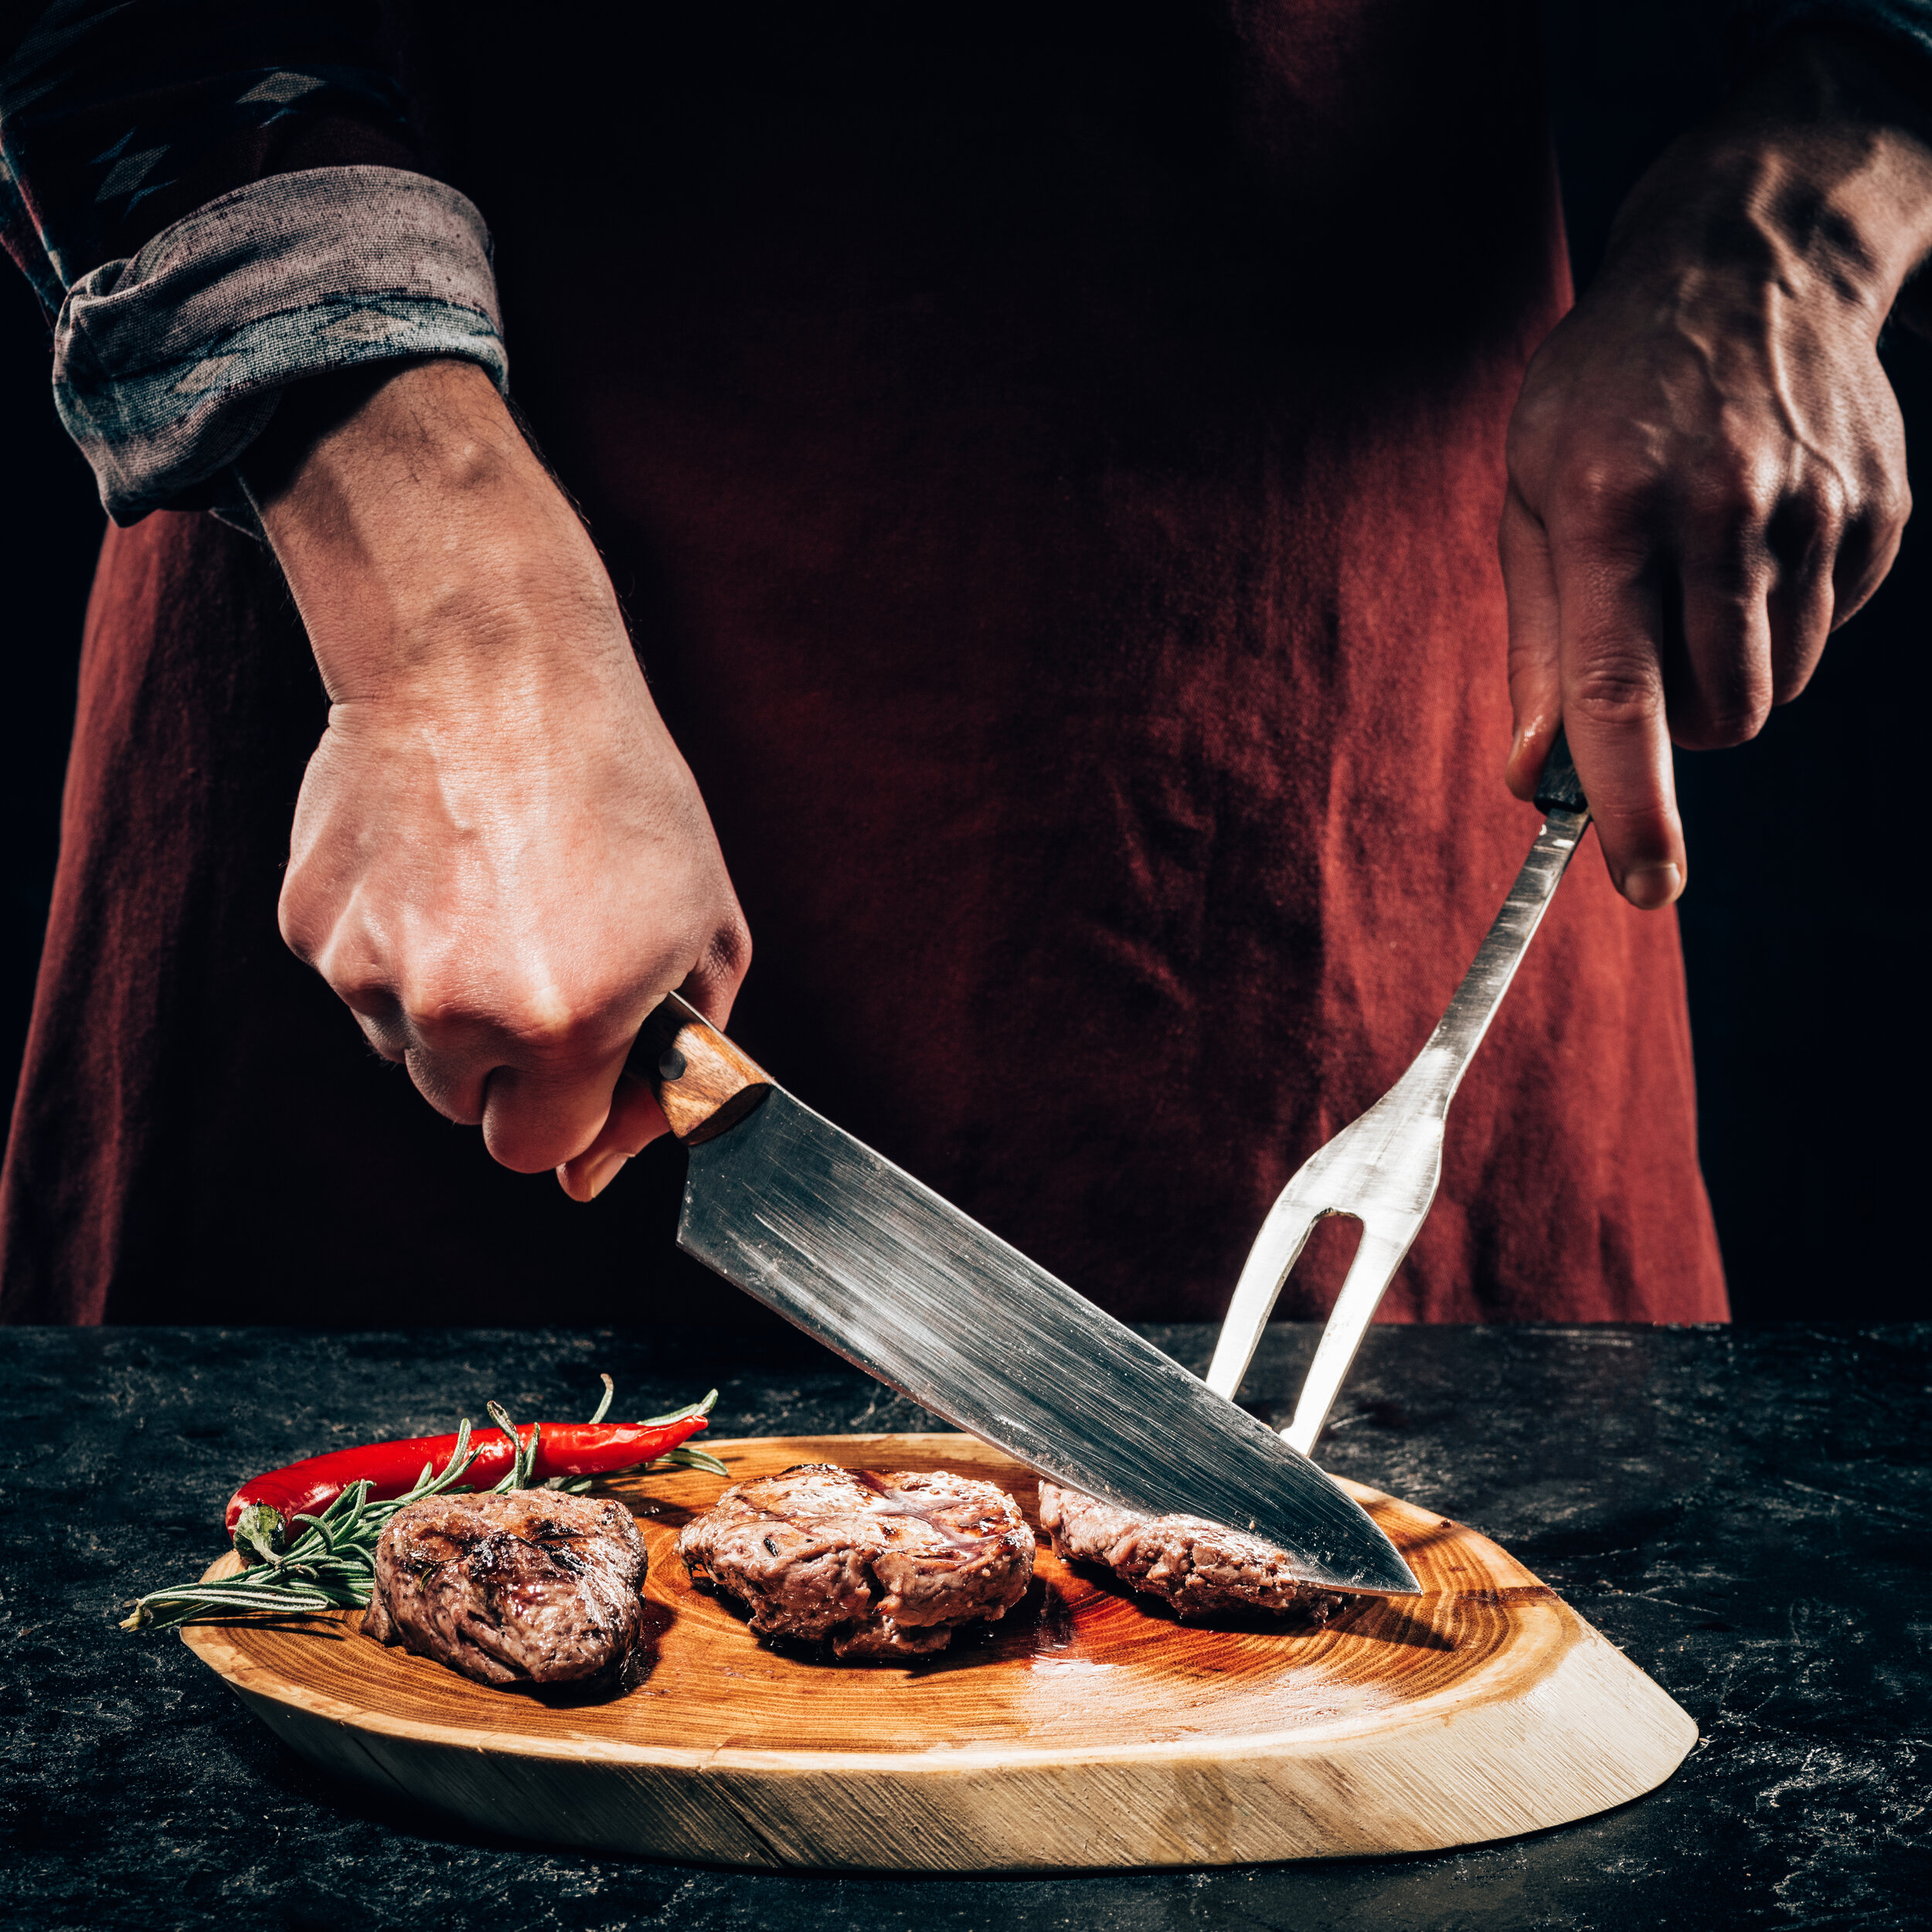 close-up-partial-view-chef-in-apron-with-meat-fork-and-knife-slicing-gourmet-grilled-steaks-with-rosemary-and-chili-pepper-on-wooden-board-902944120_4766x4766.jpeg